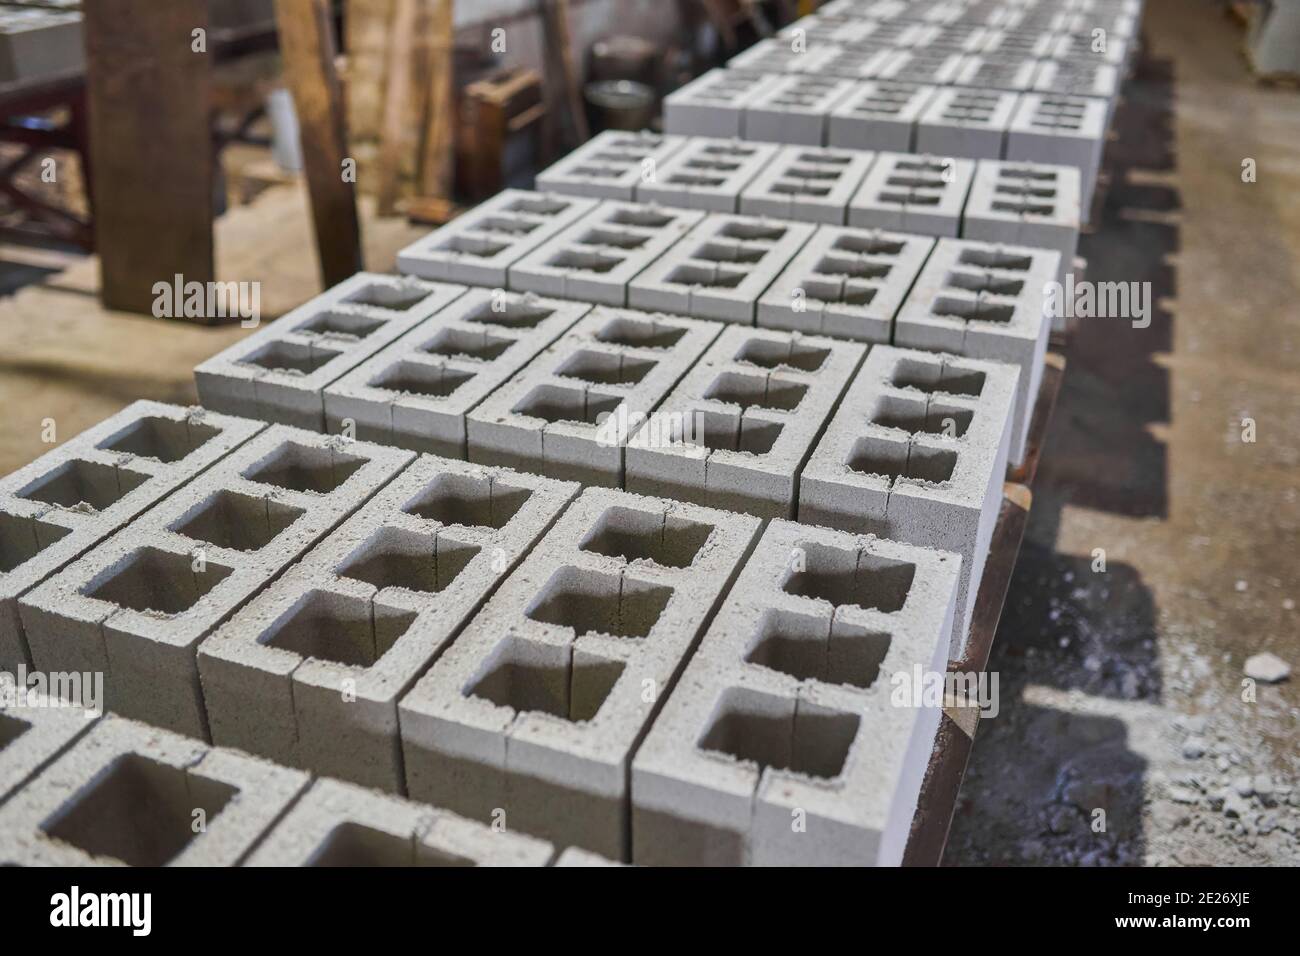 Industrial production of building materials from pressed cement mortar. High quality concrete block or brick. Finished products stacked Stock Photo - Alamy